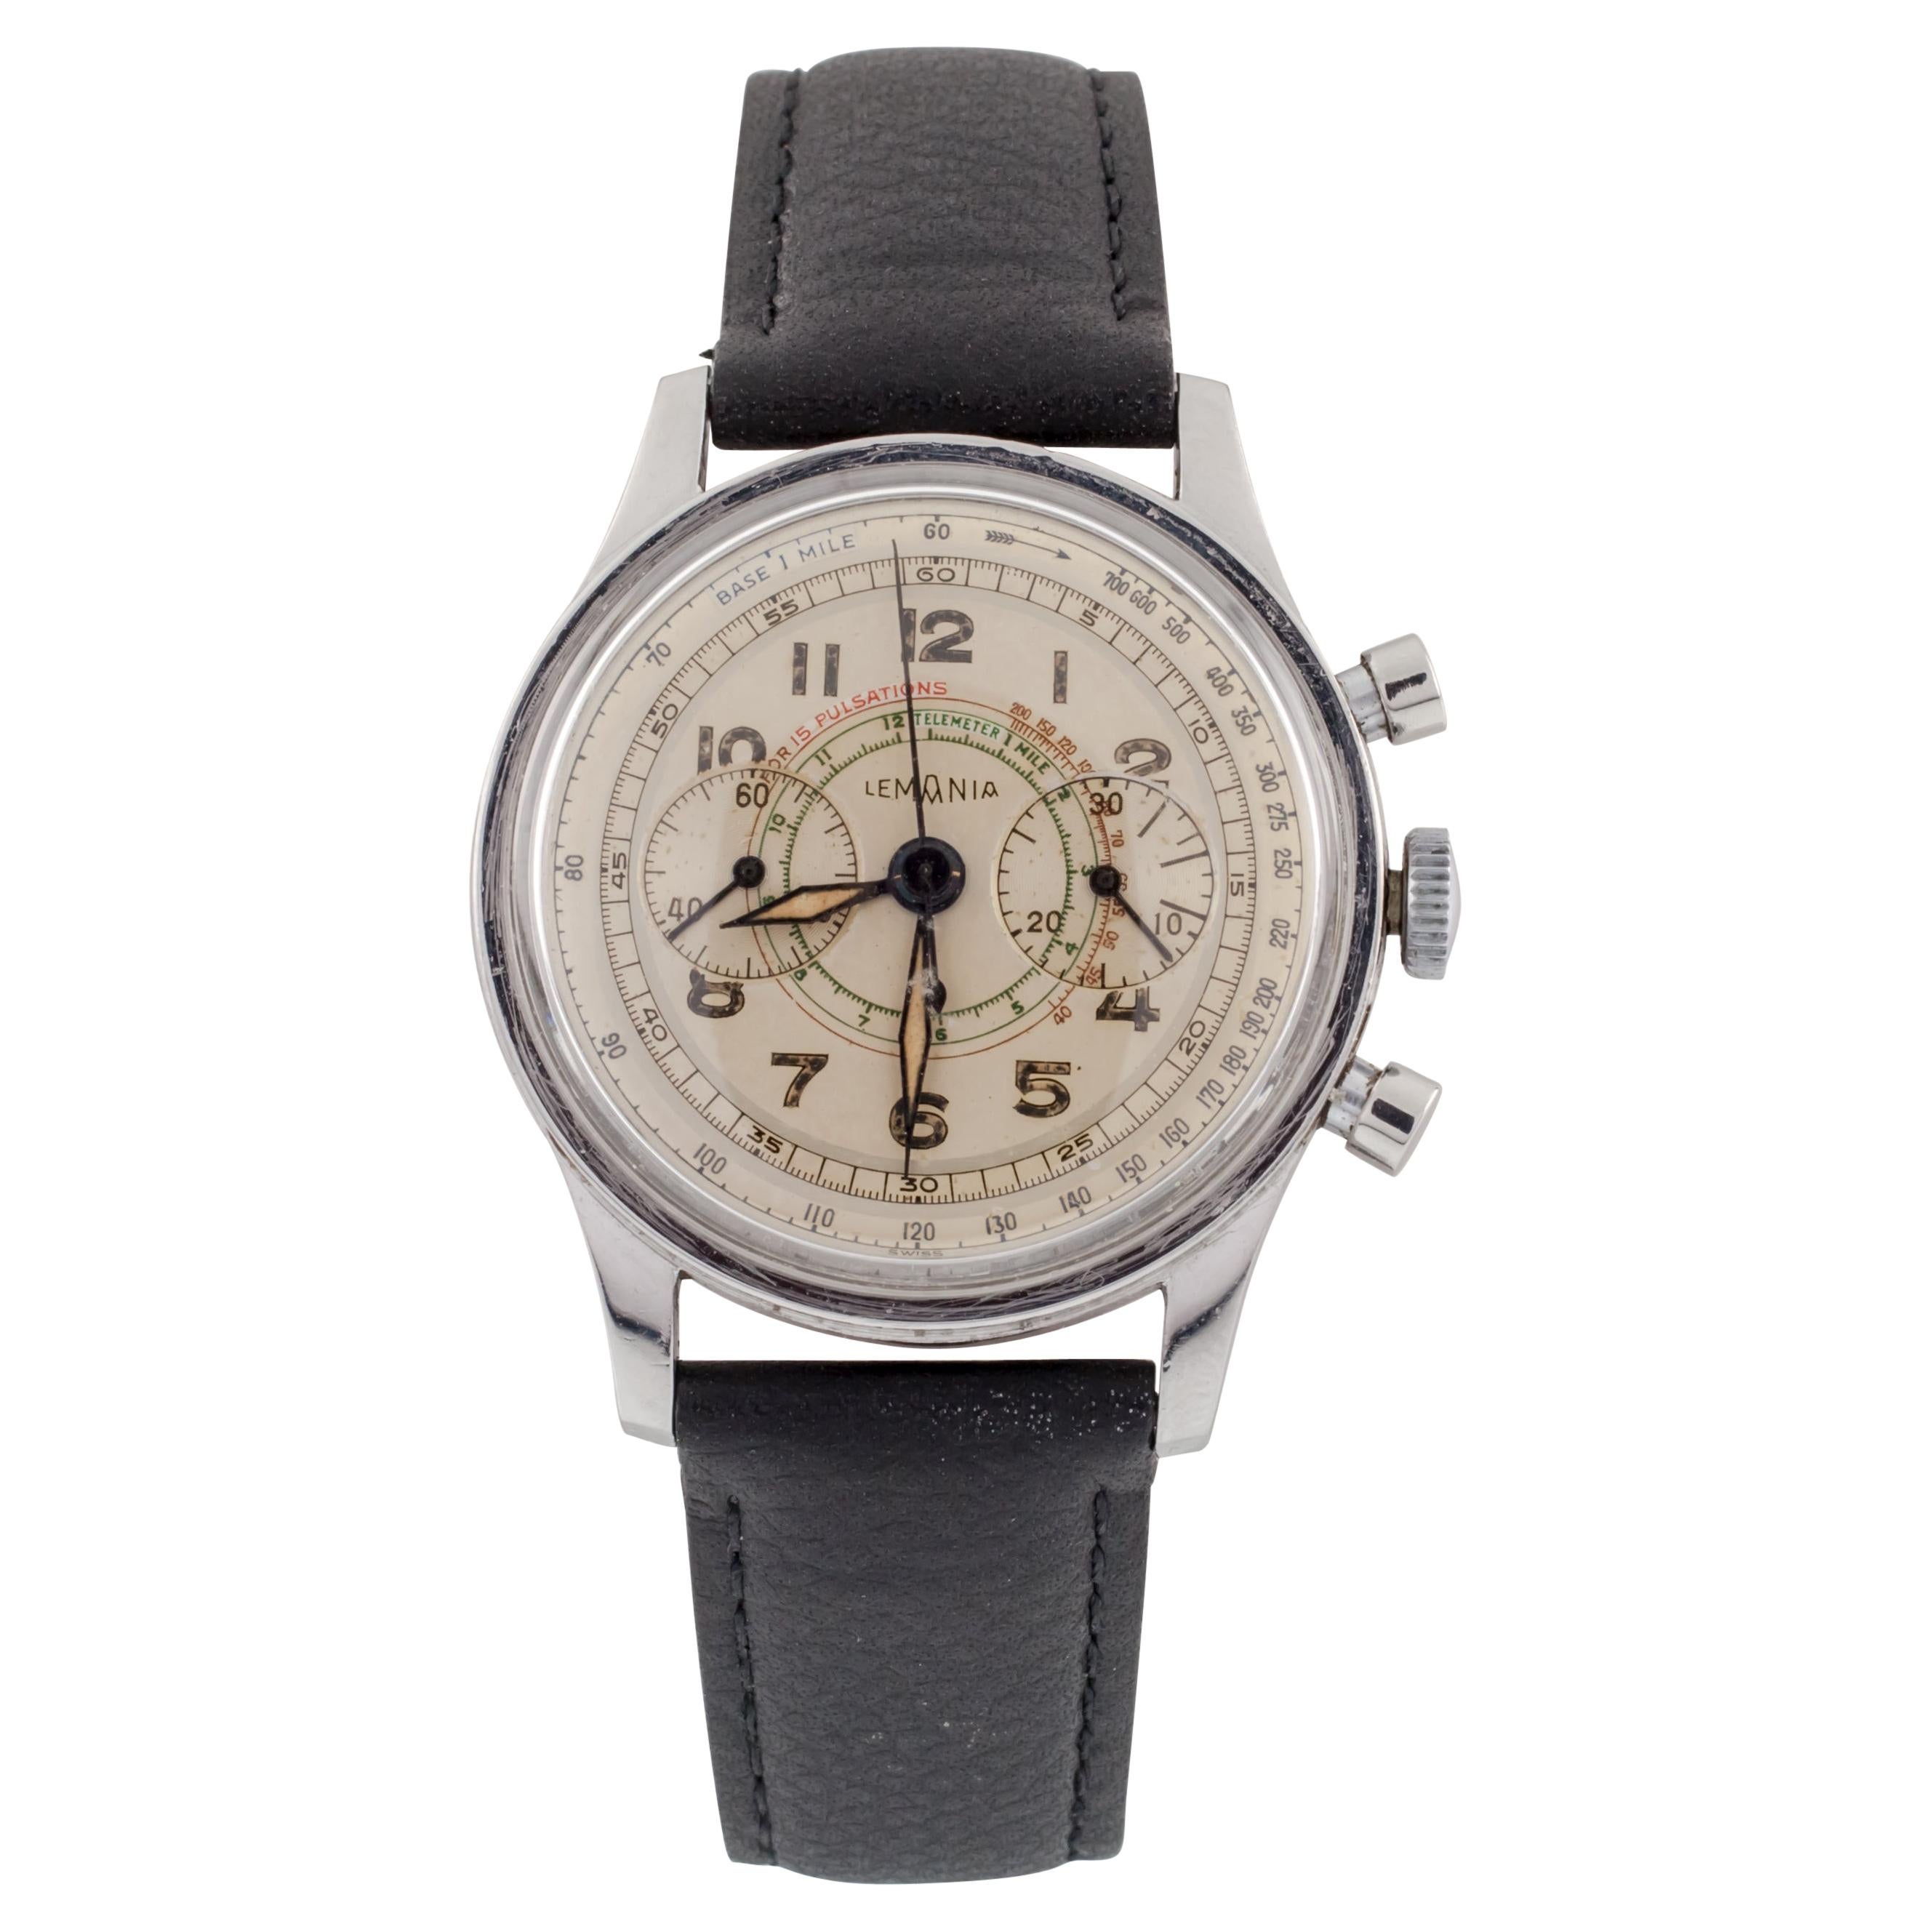 Lemania Stainless Steel 15TL Chronograph Watch Tachymeter 1940s Leather Band